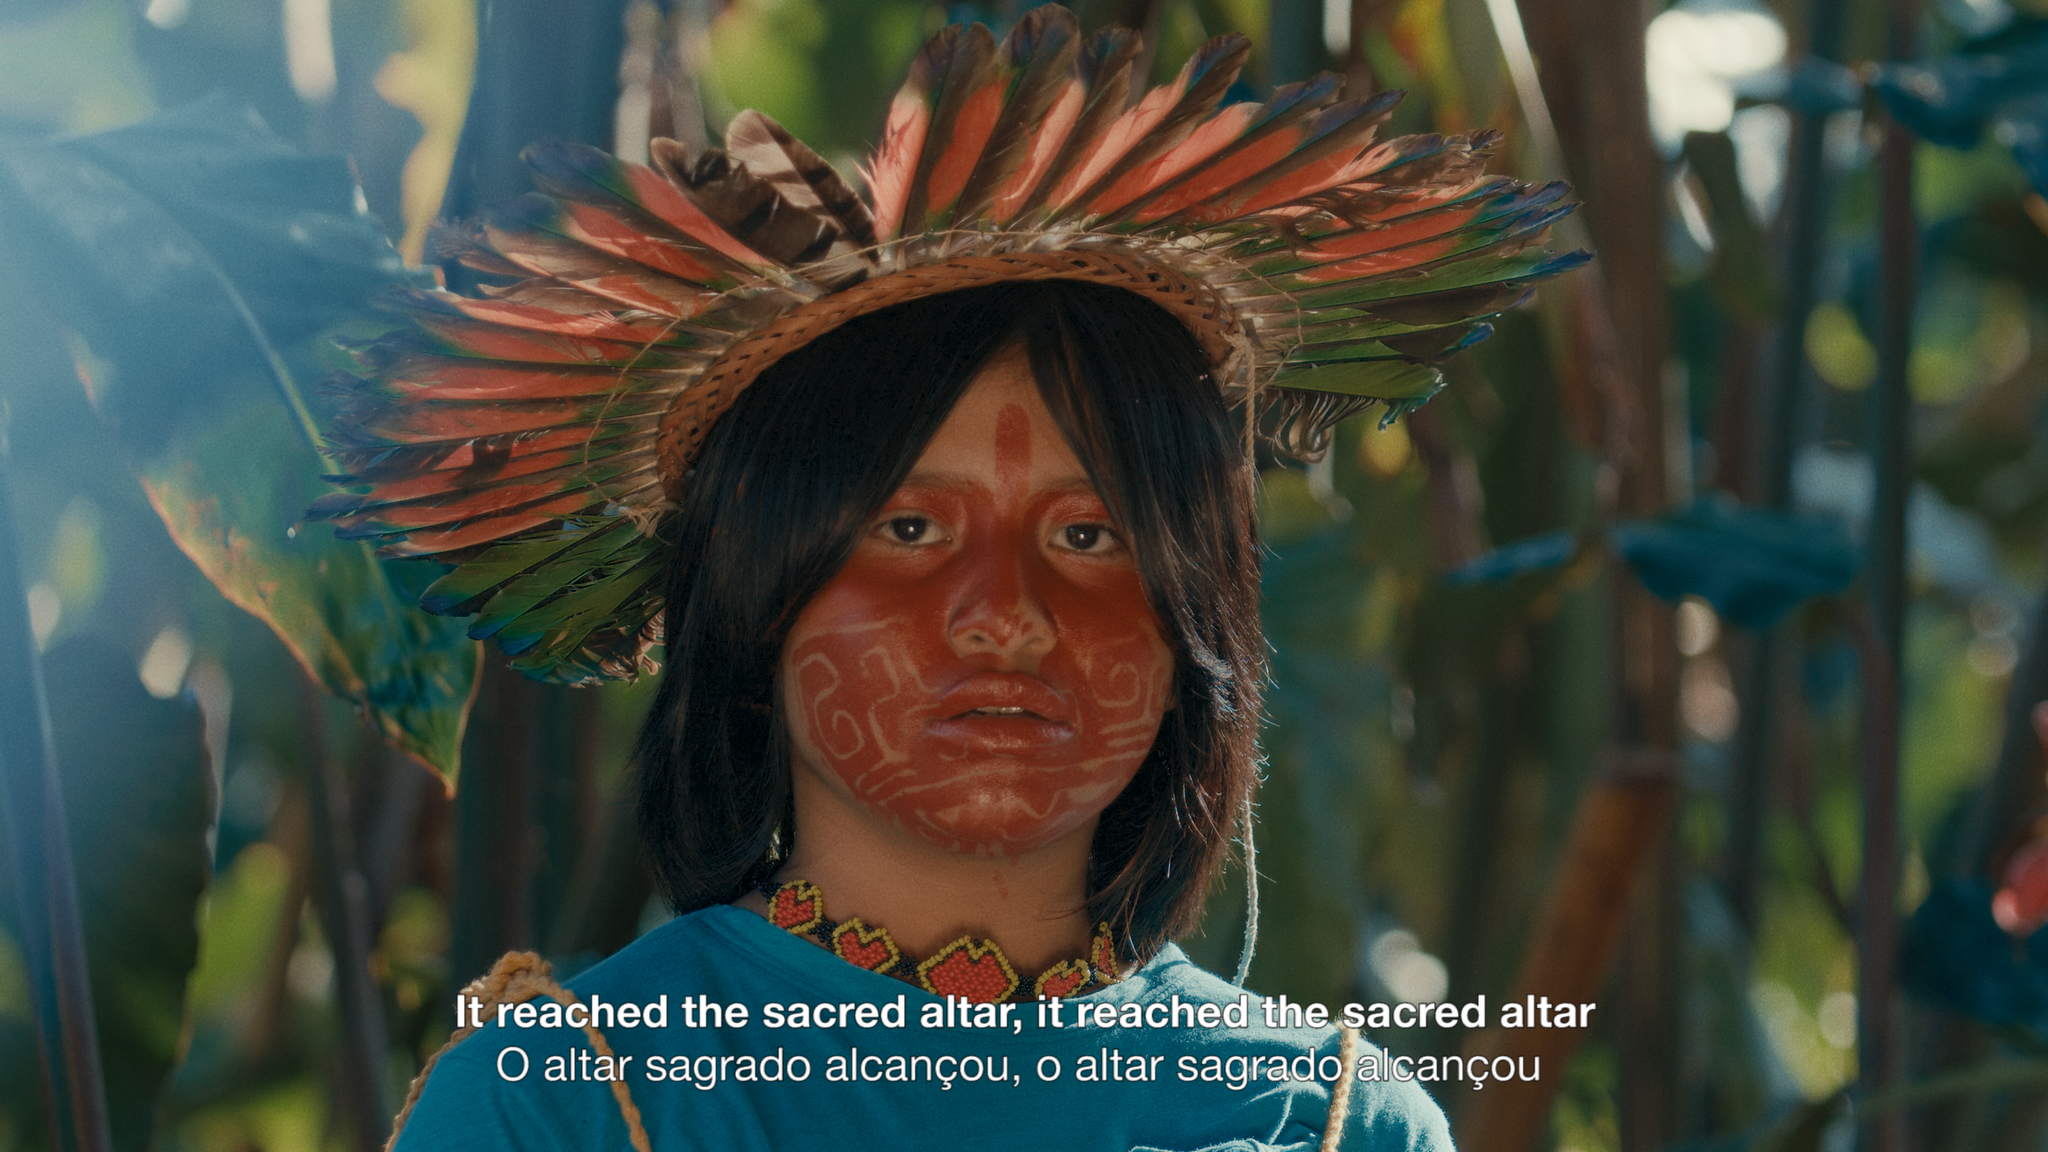 A still image from Leviathan Episode 8 showing a young indigenous person in traditional dress and face paint looks into the camera. A caption included on the image reads: 'It reached the sacred alter, It reached the sacred alter".